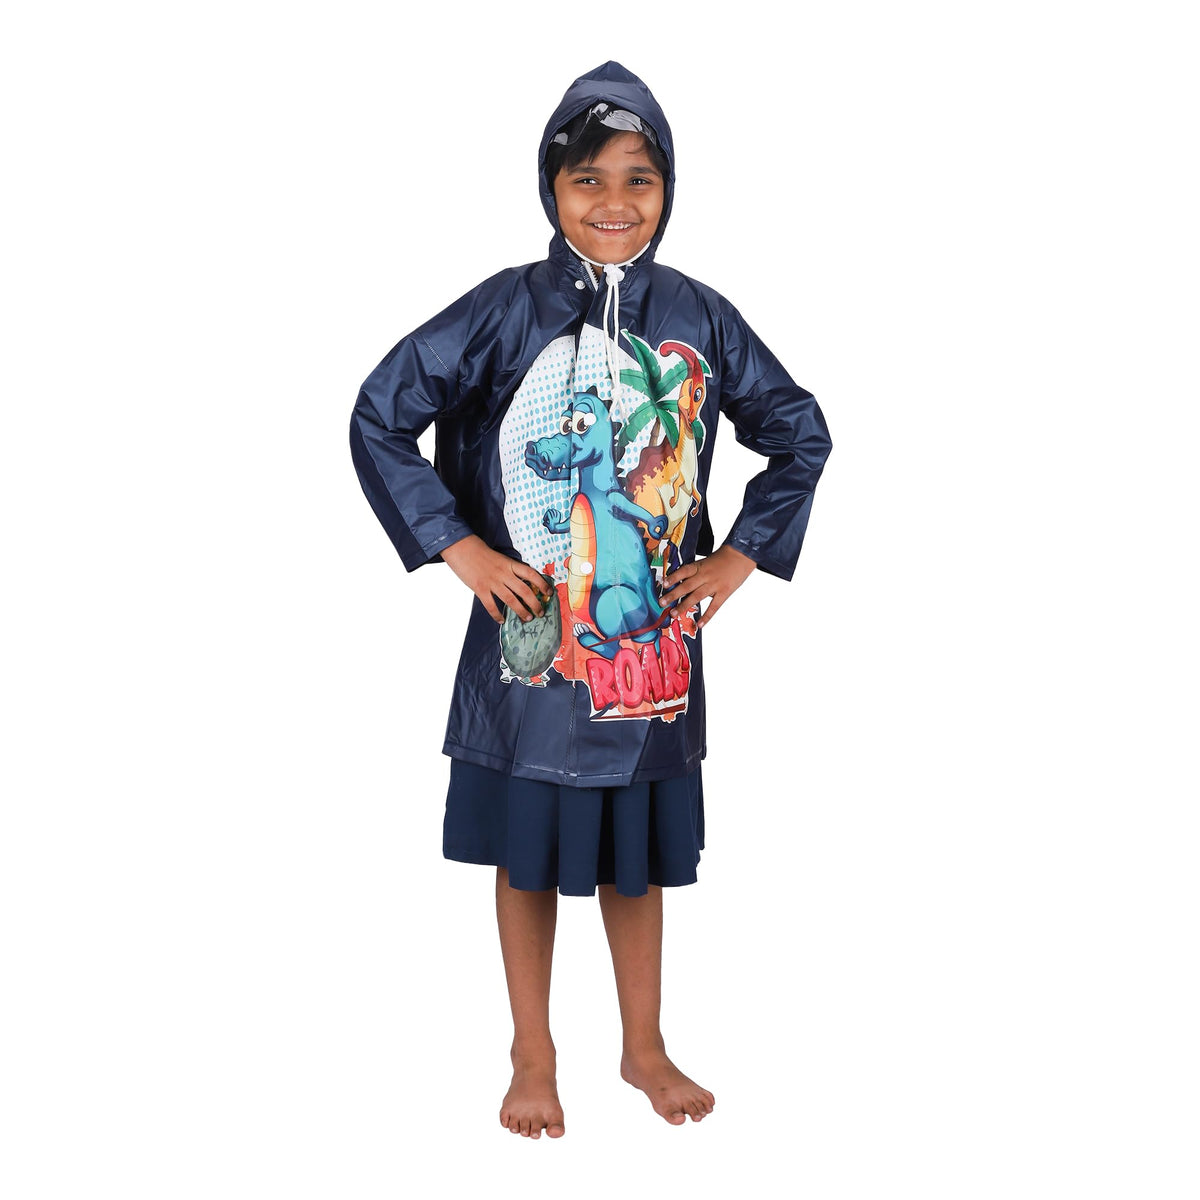 THE CLOWNFISH Toon Caper Series Kids Waterproof PVC Longcoat with Adjustable Hood & Extra Space for Backpack/Schoolbag Holding. Printed Plastic Pouch. Kid Age-5-6 years (Midnight Blue)